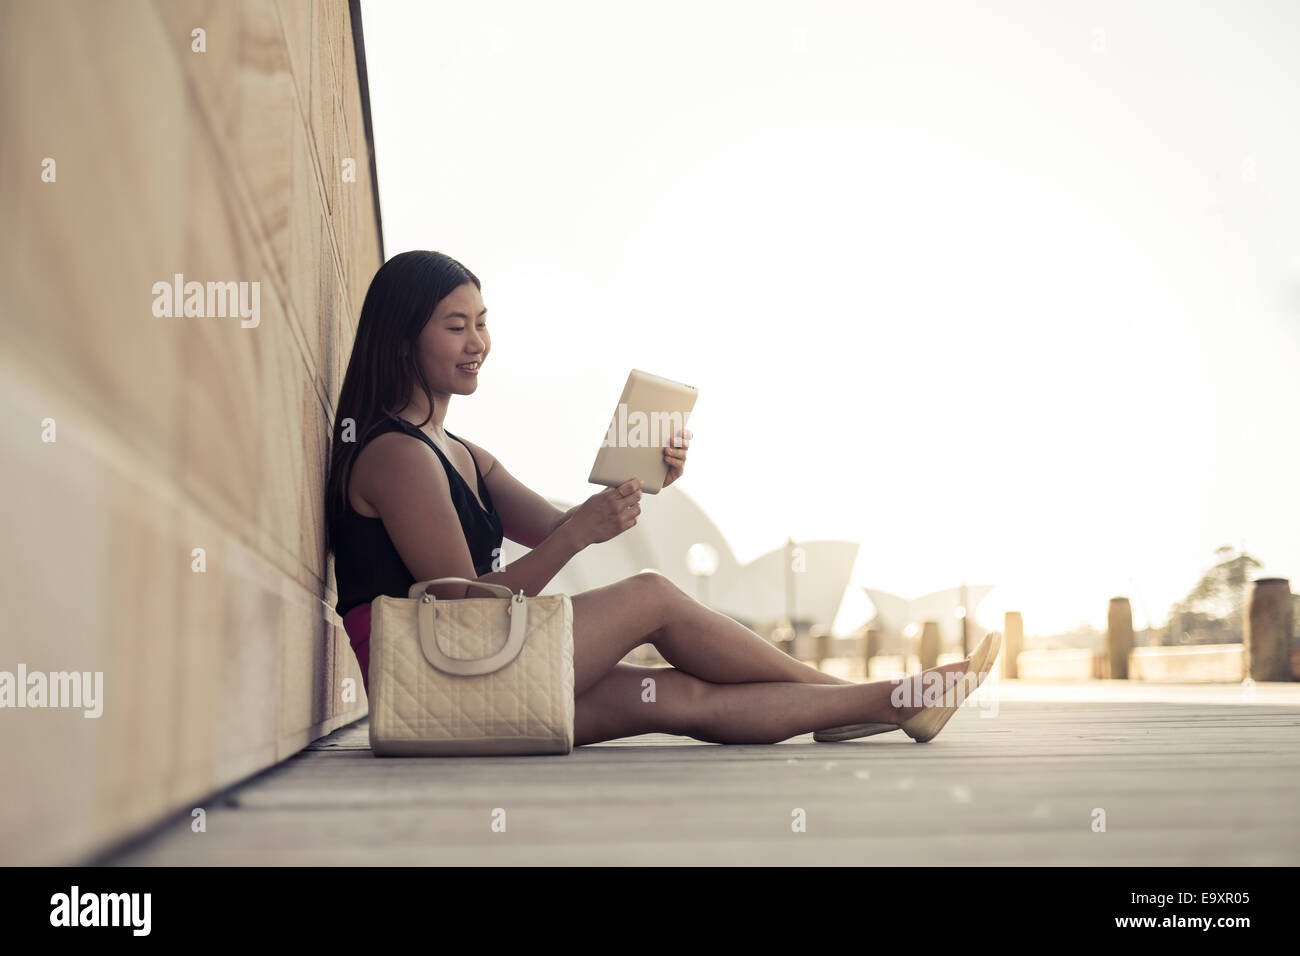 A young woman relaxing whilst looking at content on a tablet device Stock Photo